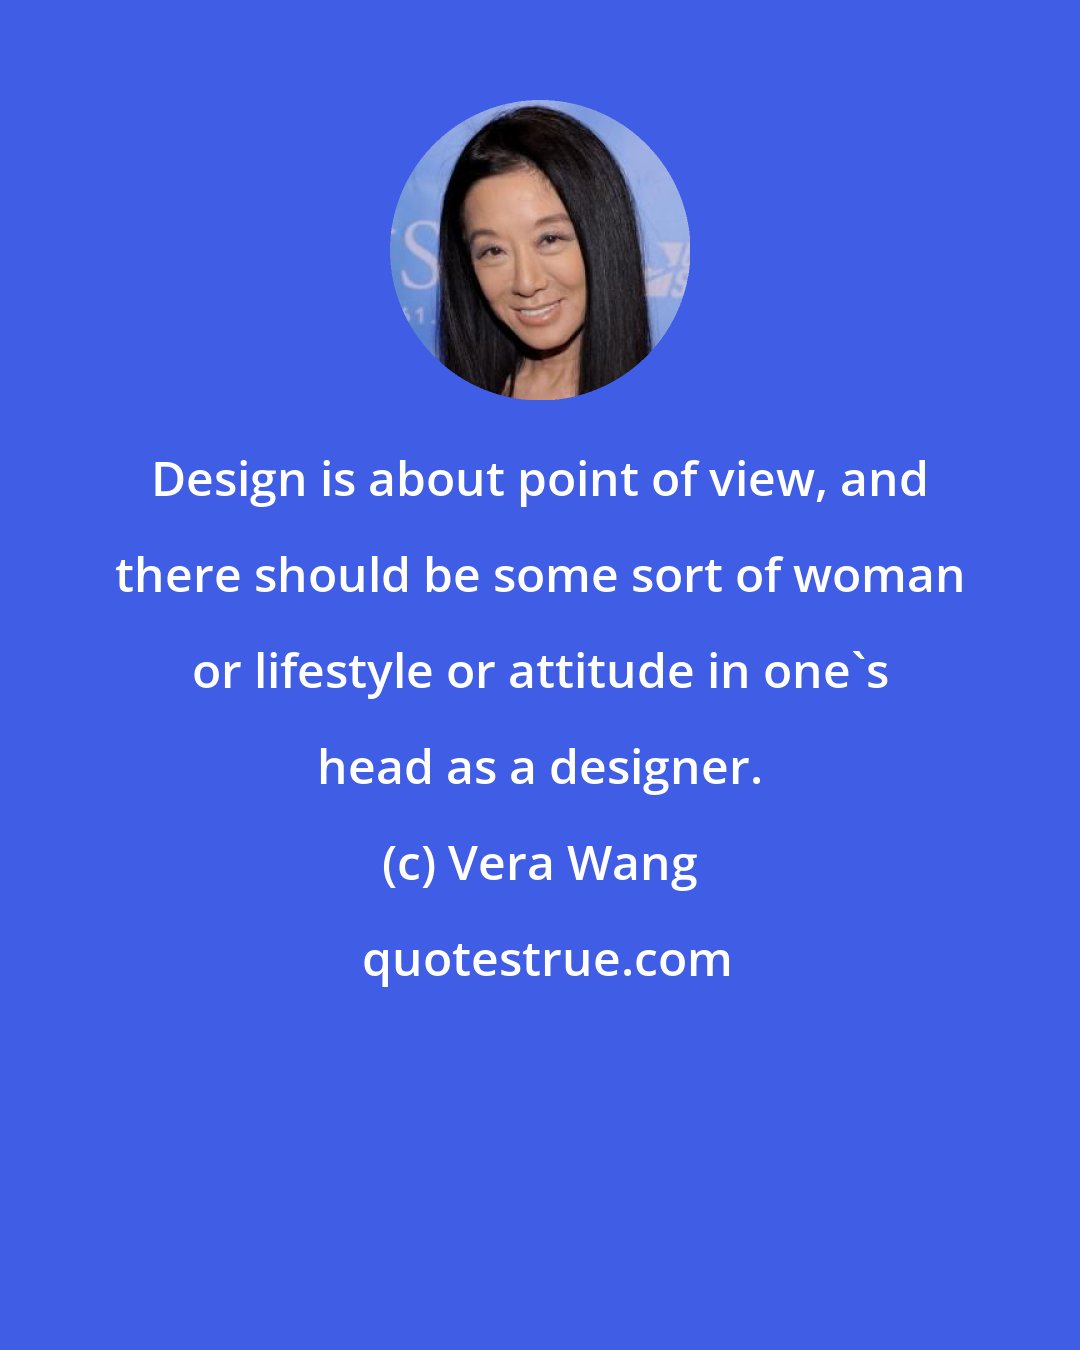 Vera Wang: Design is about point of view, and there should be some sort of woman or lifestyle or attitude in one's head as a designer.